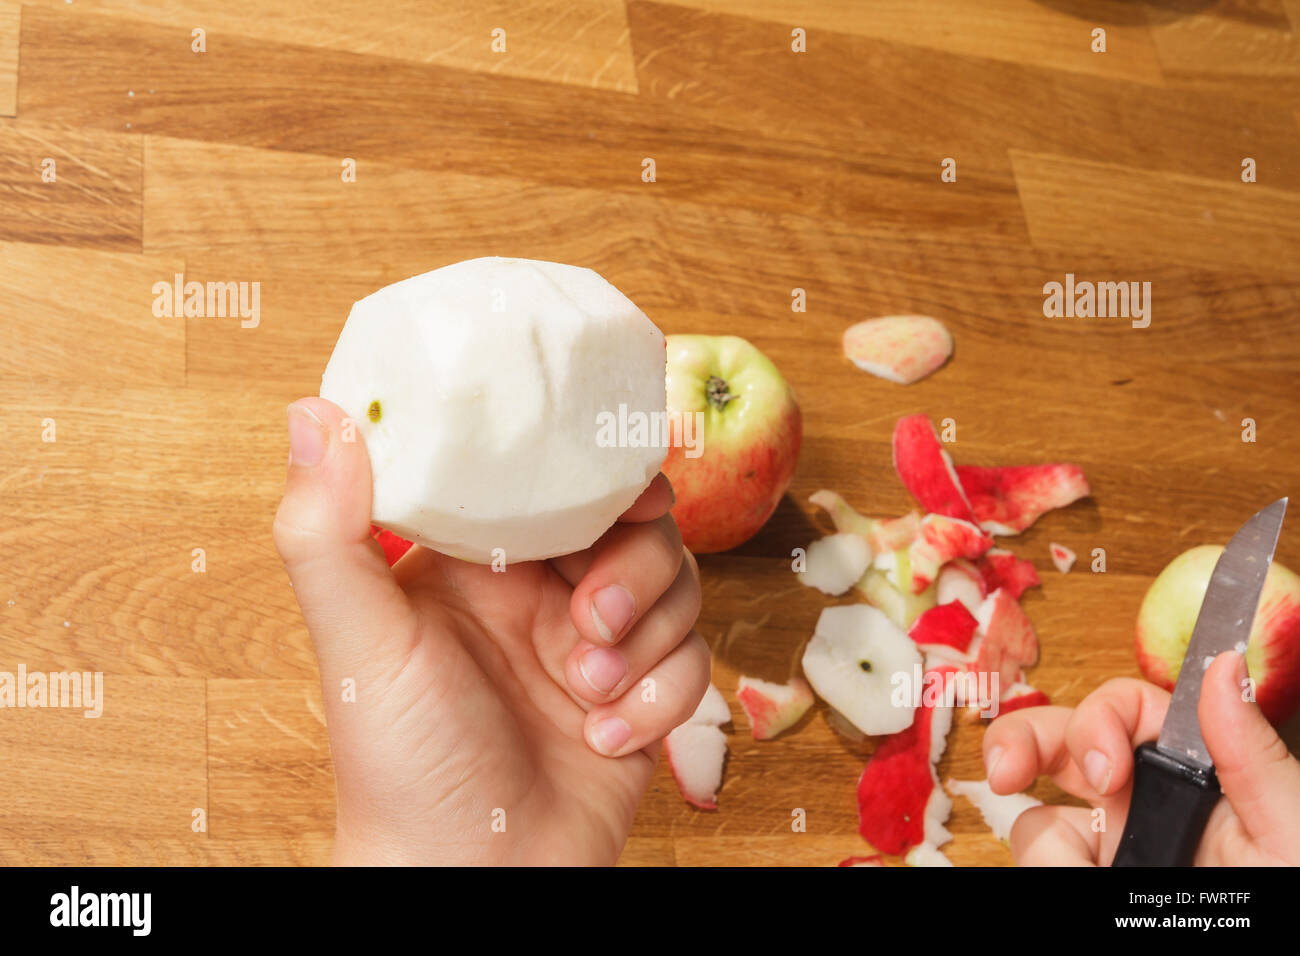 A hand holding a peeled apple over a pile of peelings Stock Photo